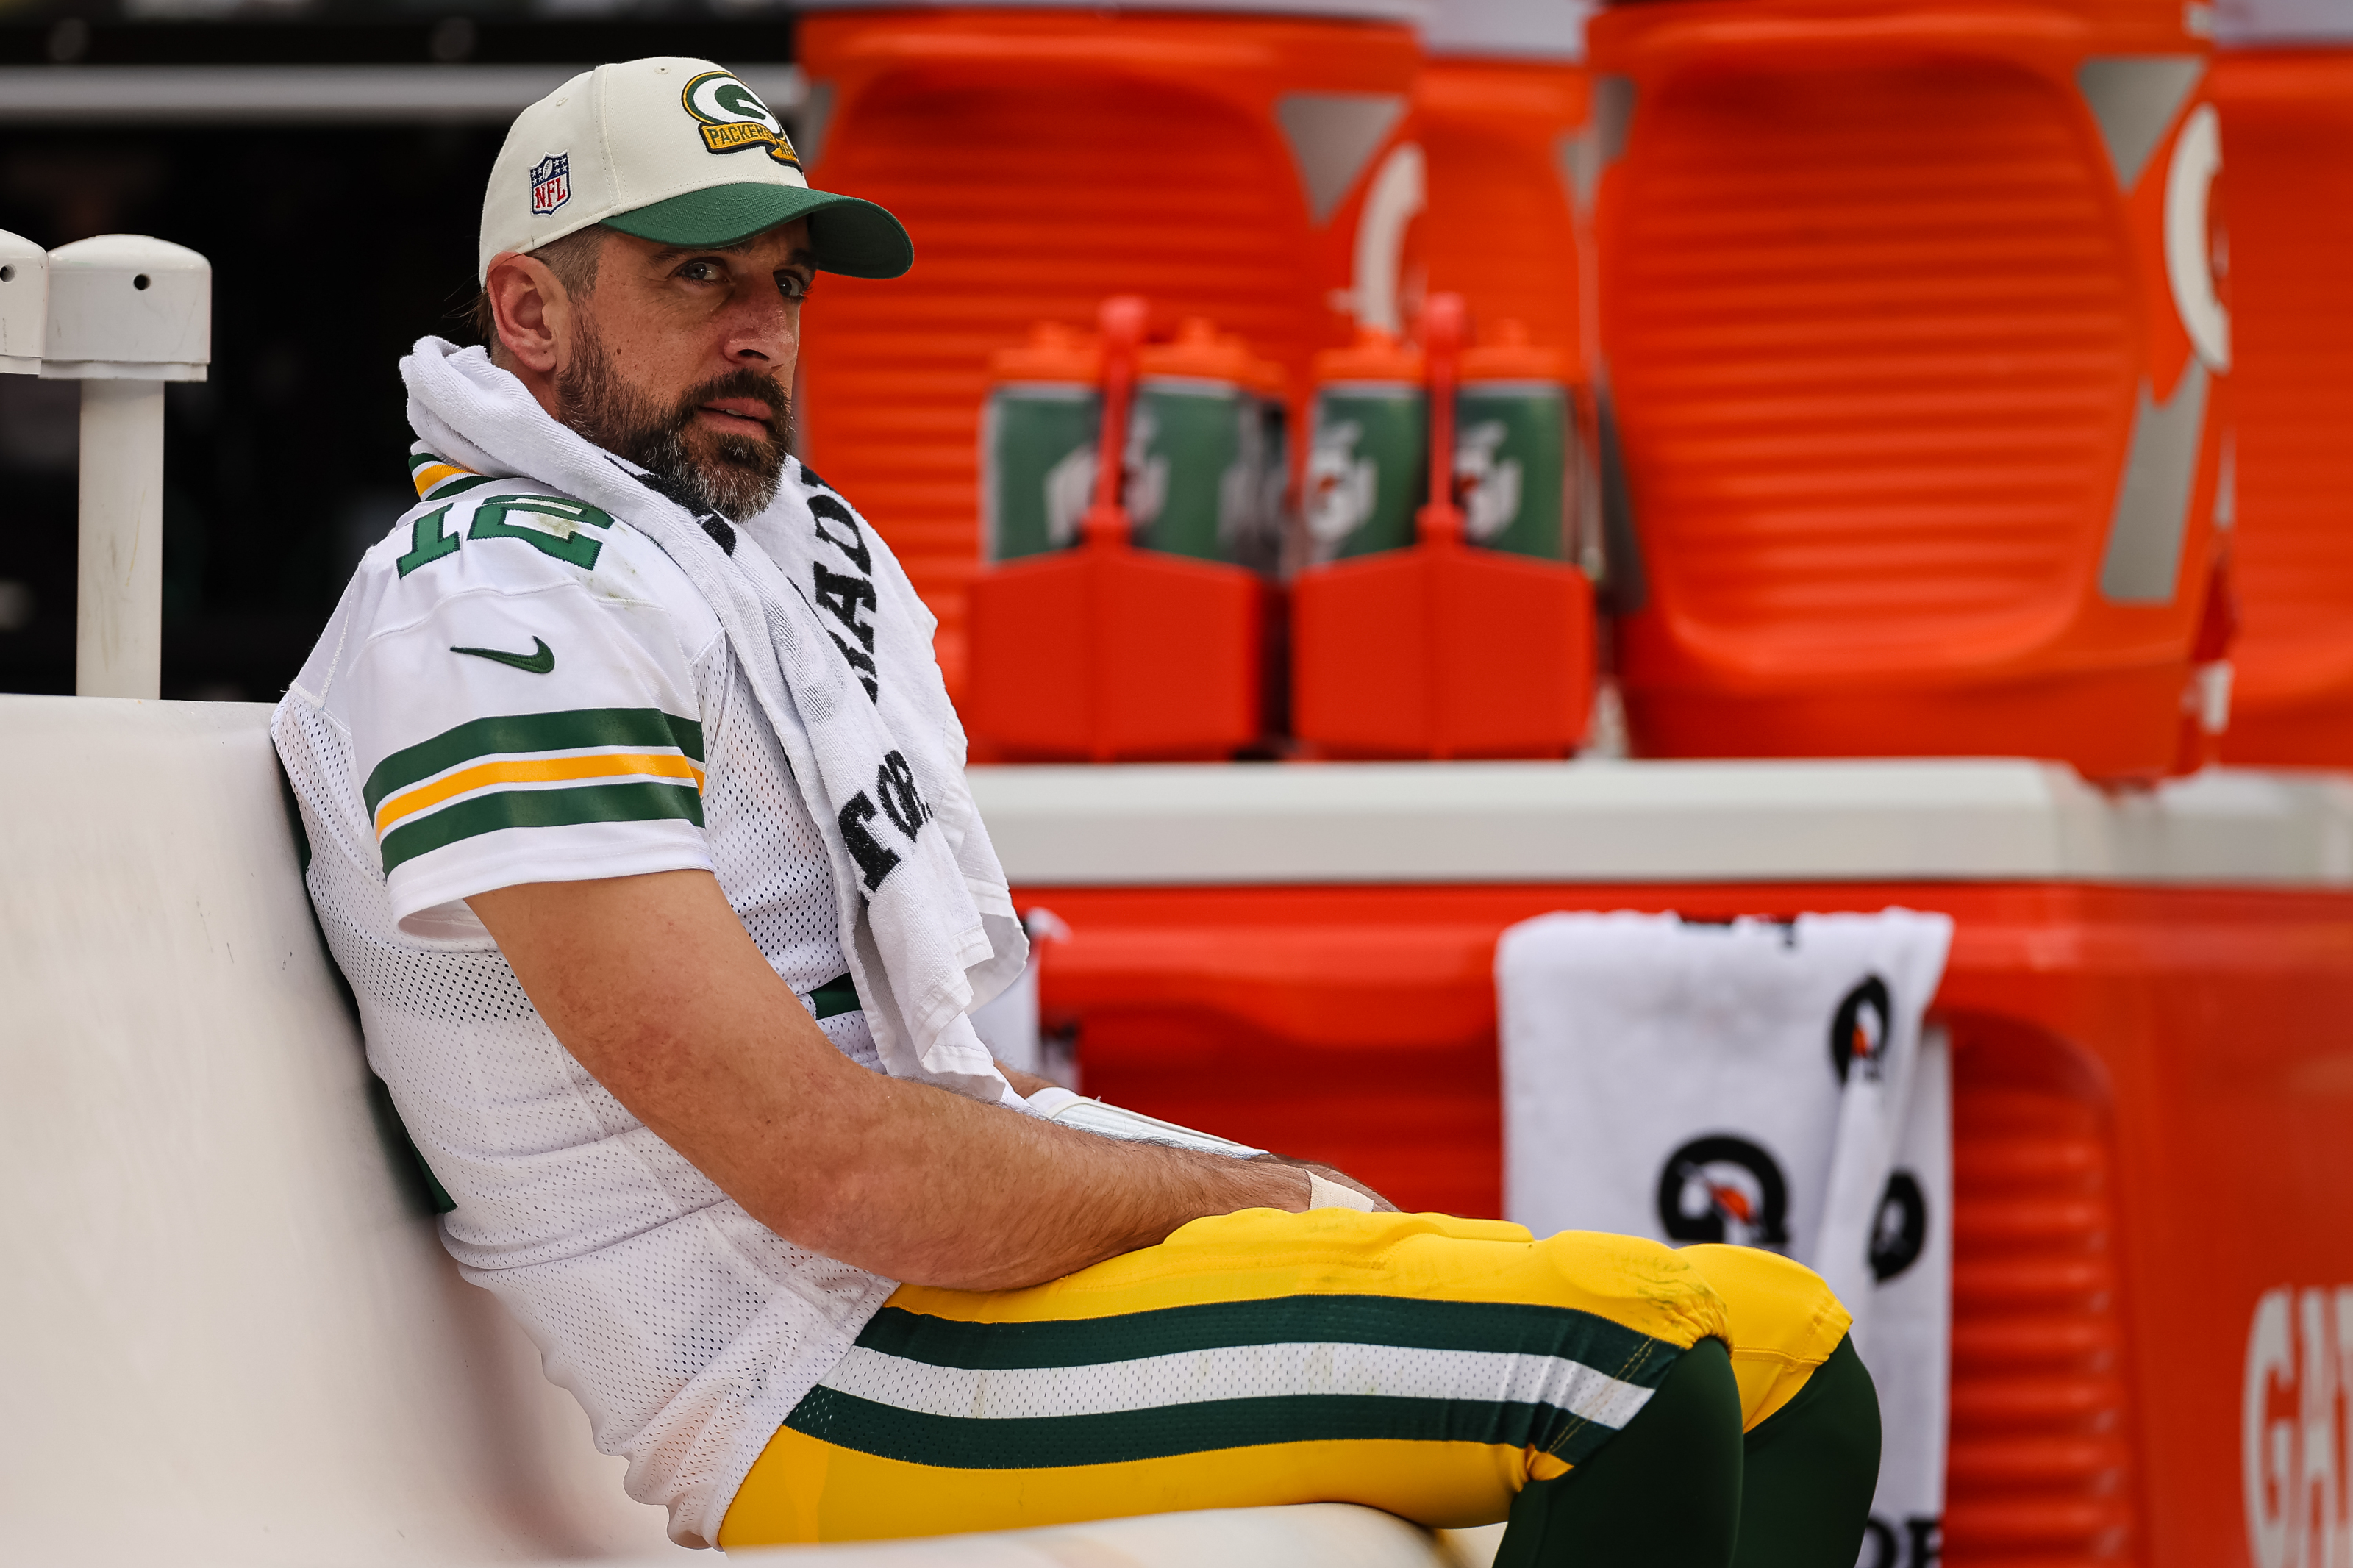 Aaron Rodgers will never win another Super Bowl in Green Bay